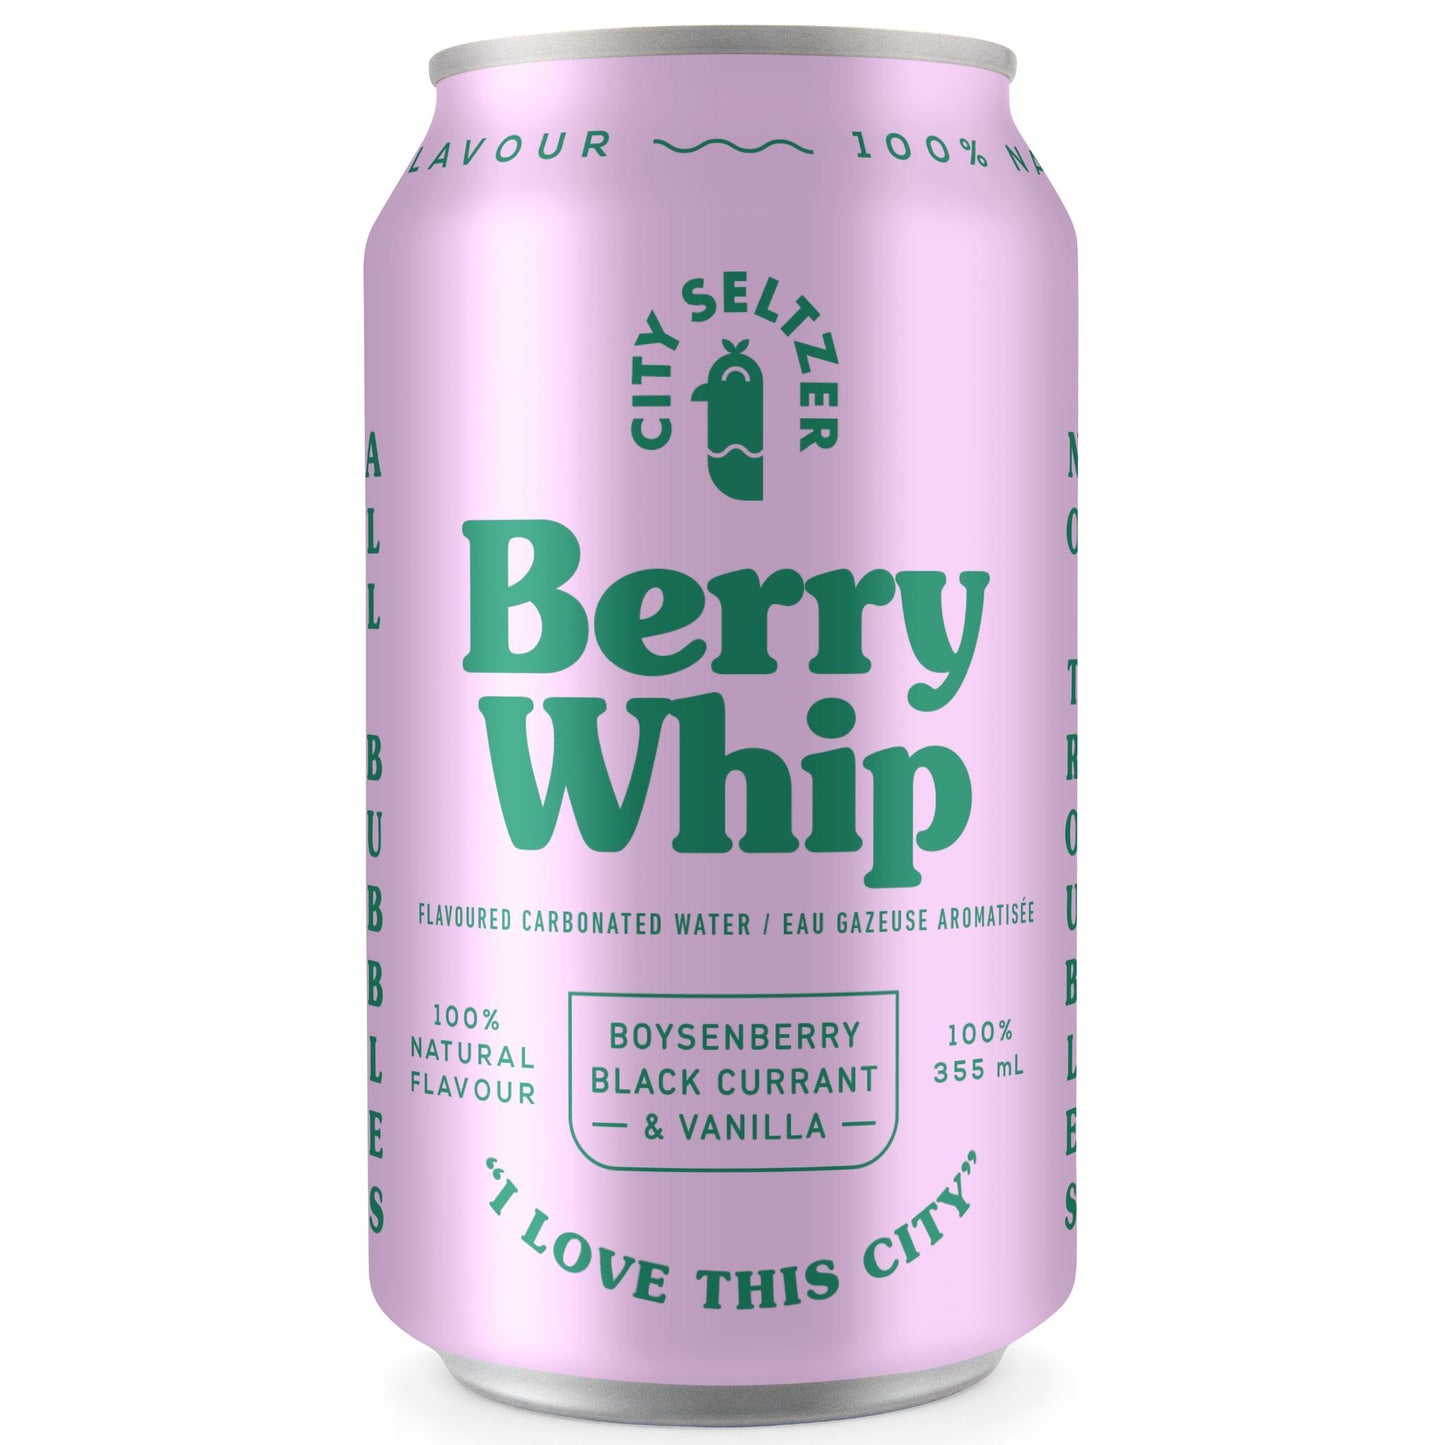 City Seltzer Berry Whip is available at Knyota Drinks in Ottawa.